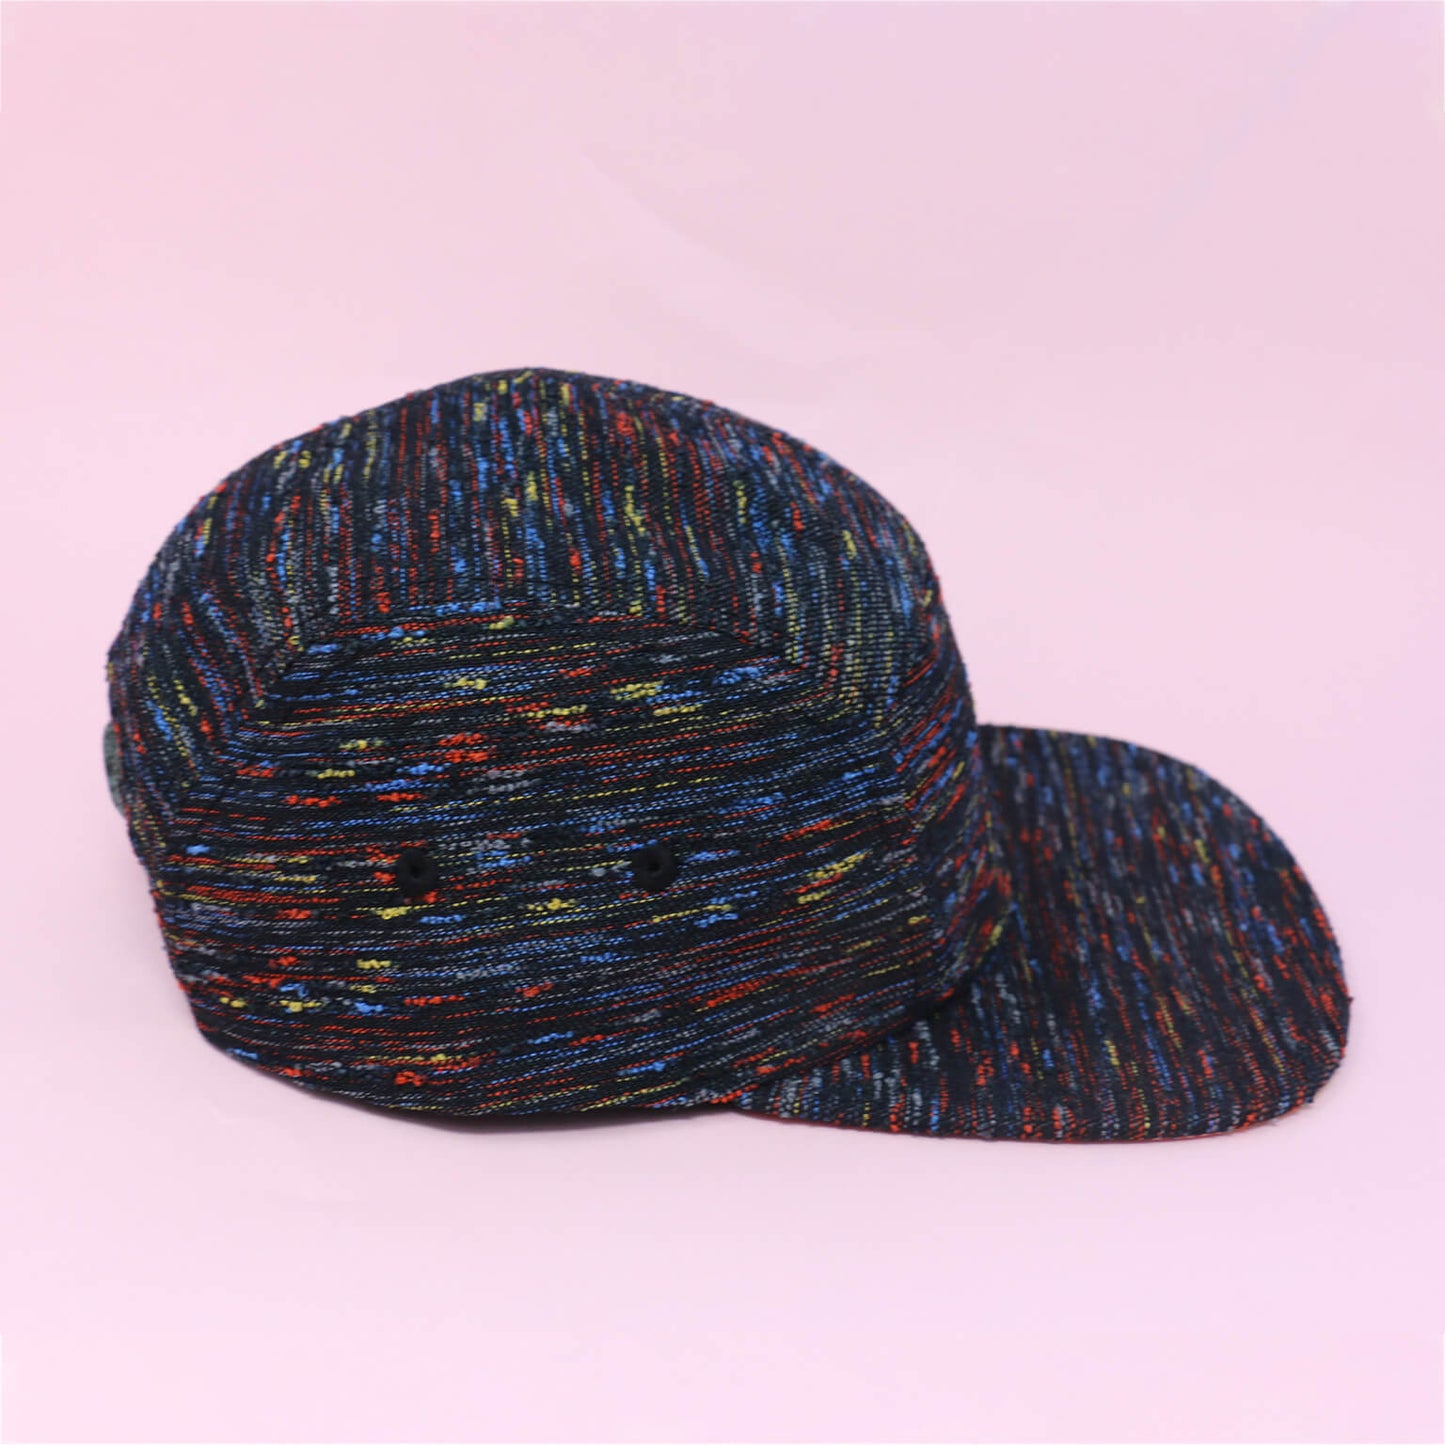 Lil' Pride – storied hats